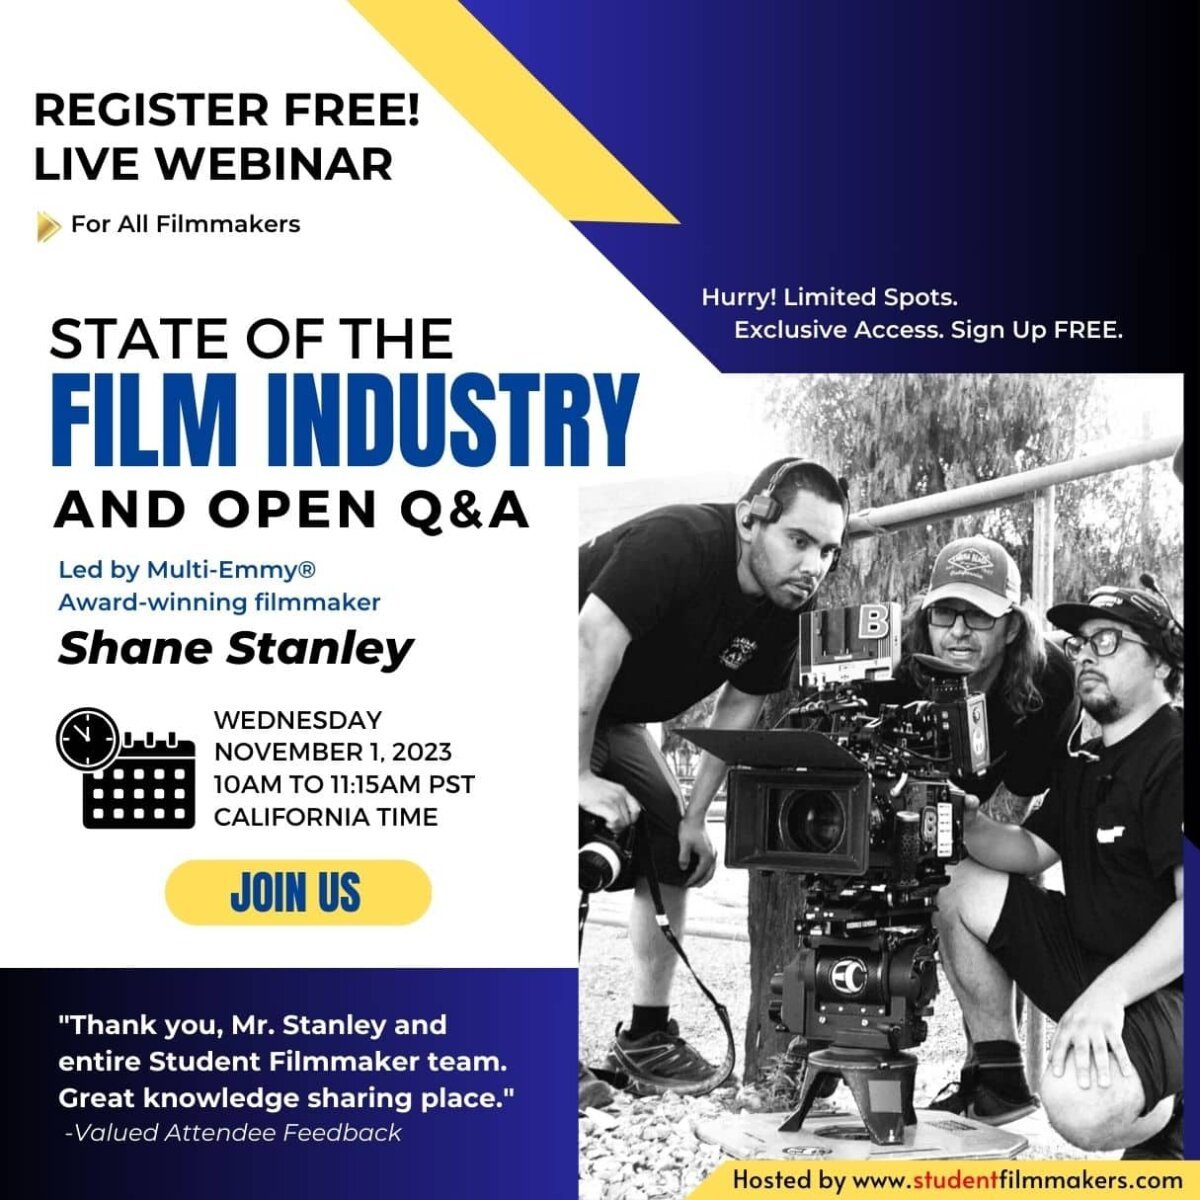 "State of the Film Industry and Open Q&A" with Multi-Emmy® Award-Winning Filmmaker Shane Stanley